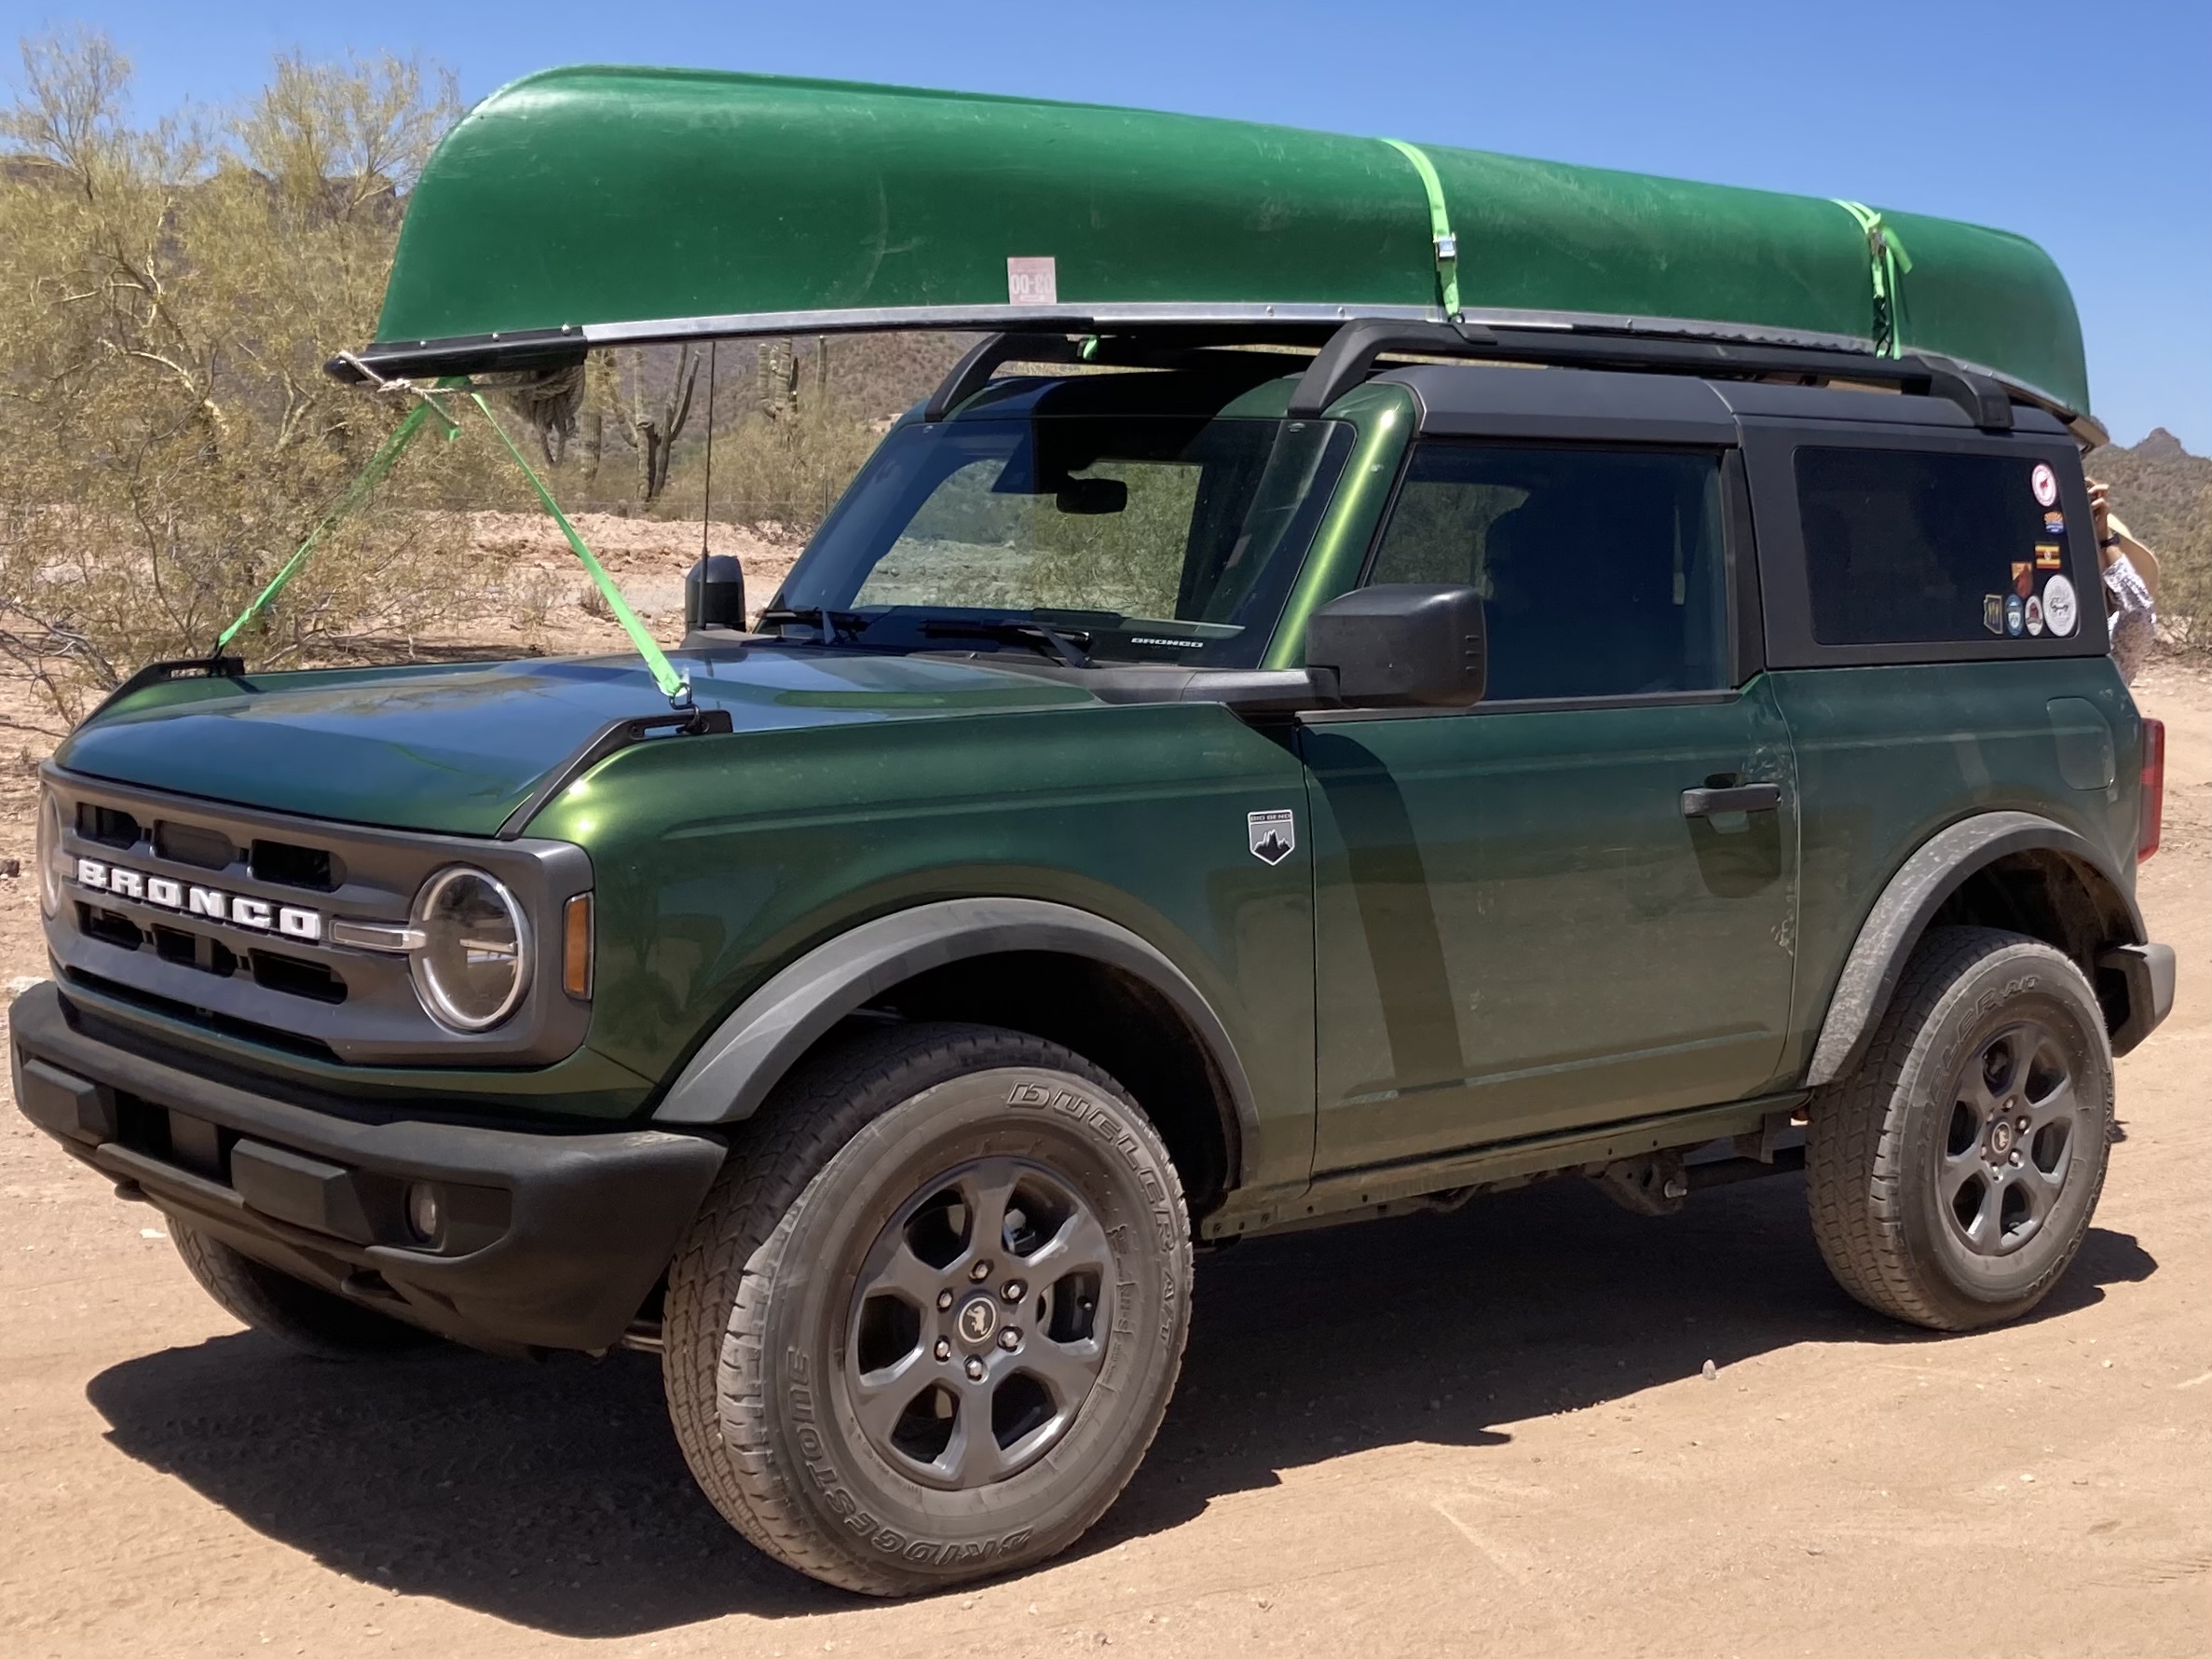 Ford Bronco 2 Door Broncos - What’s on your roof racks? [Photos Thread] IMG_7168